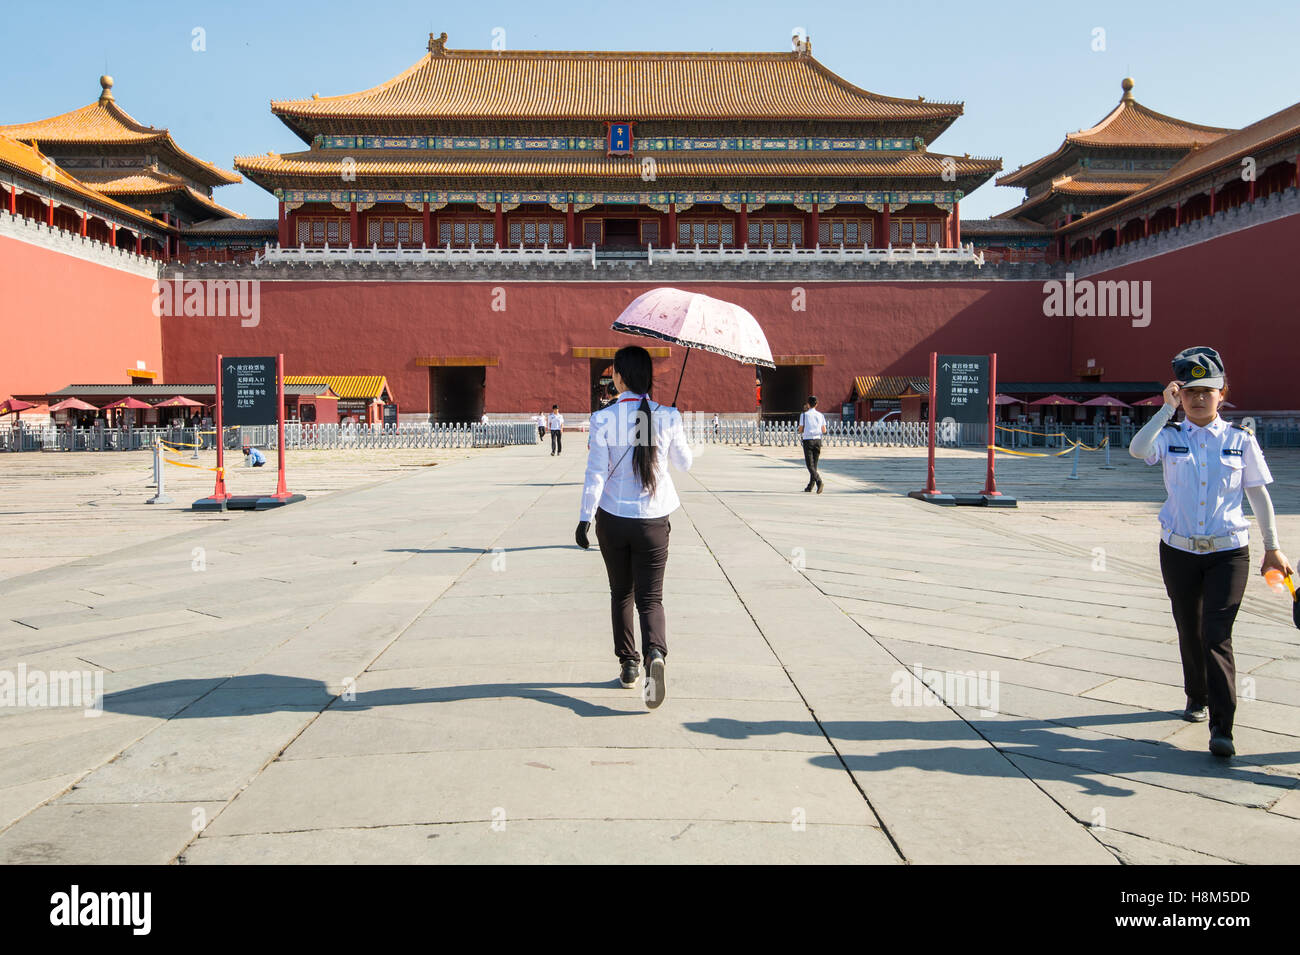 Beijing China - Tourists walking and taking pictures outside of the Meridian Gate (WuMen) that surrounds the Forbidden City. Cha Stock Photo